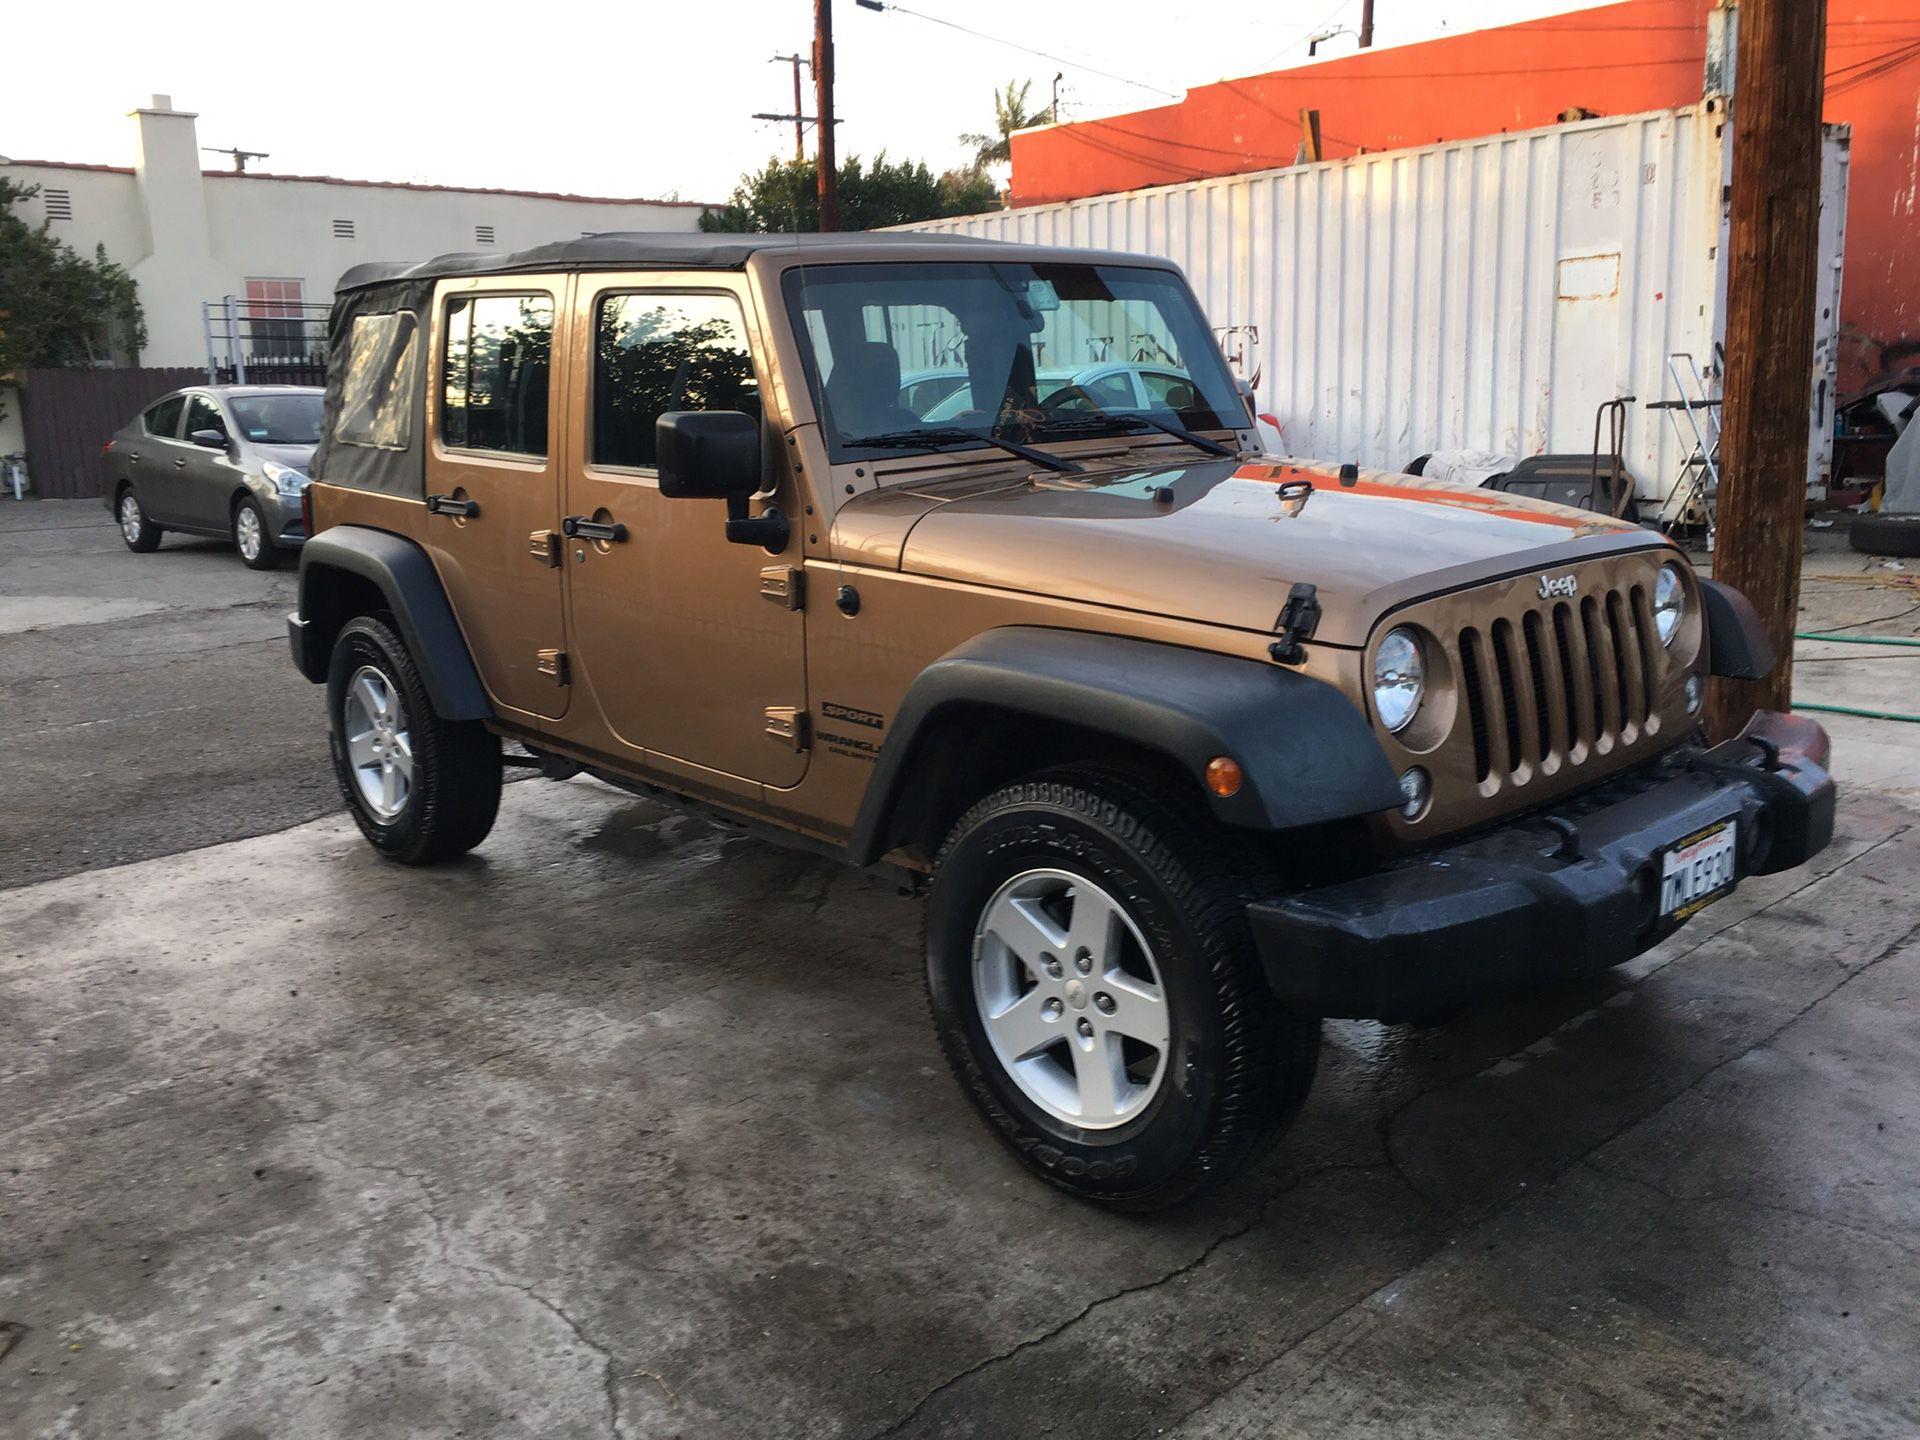 2015 Jeep Wrangler Unlimited 4 Door 6 Cyl Automatic 4X4 A/C MP3 CD Player USB 41,600 Miles Mag Rims Always Serviced Original Owner Priced to sell Fast